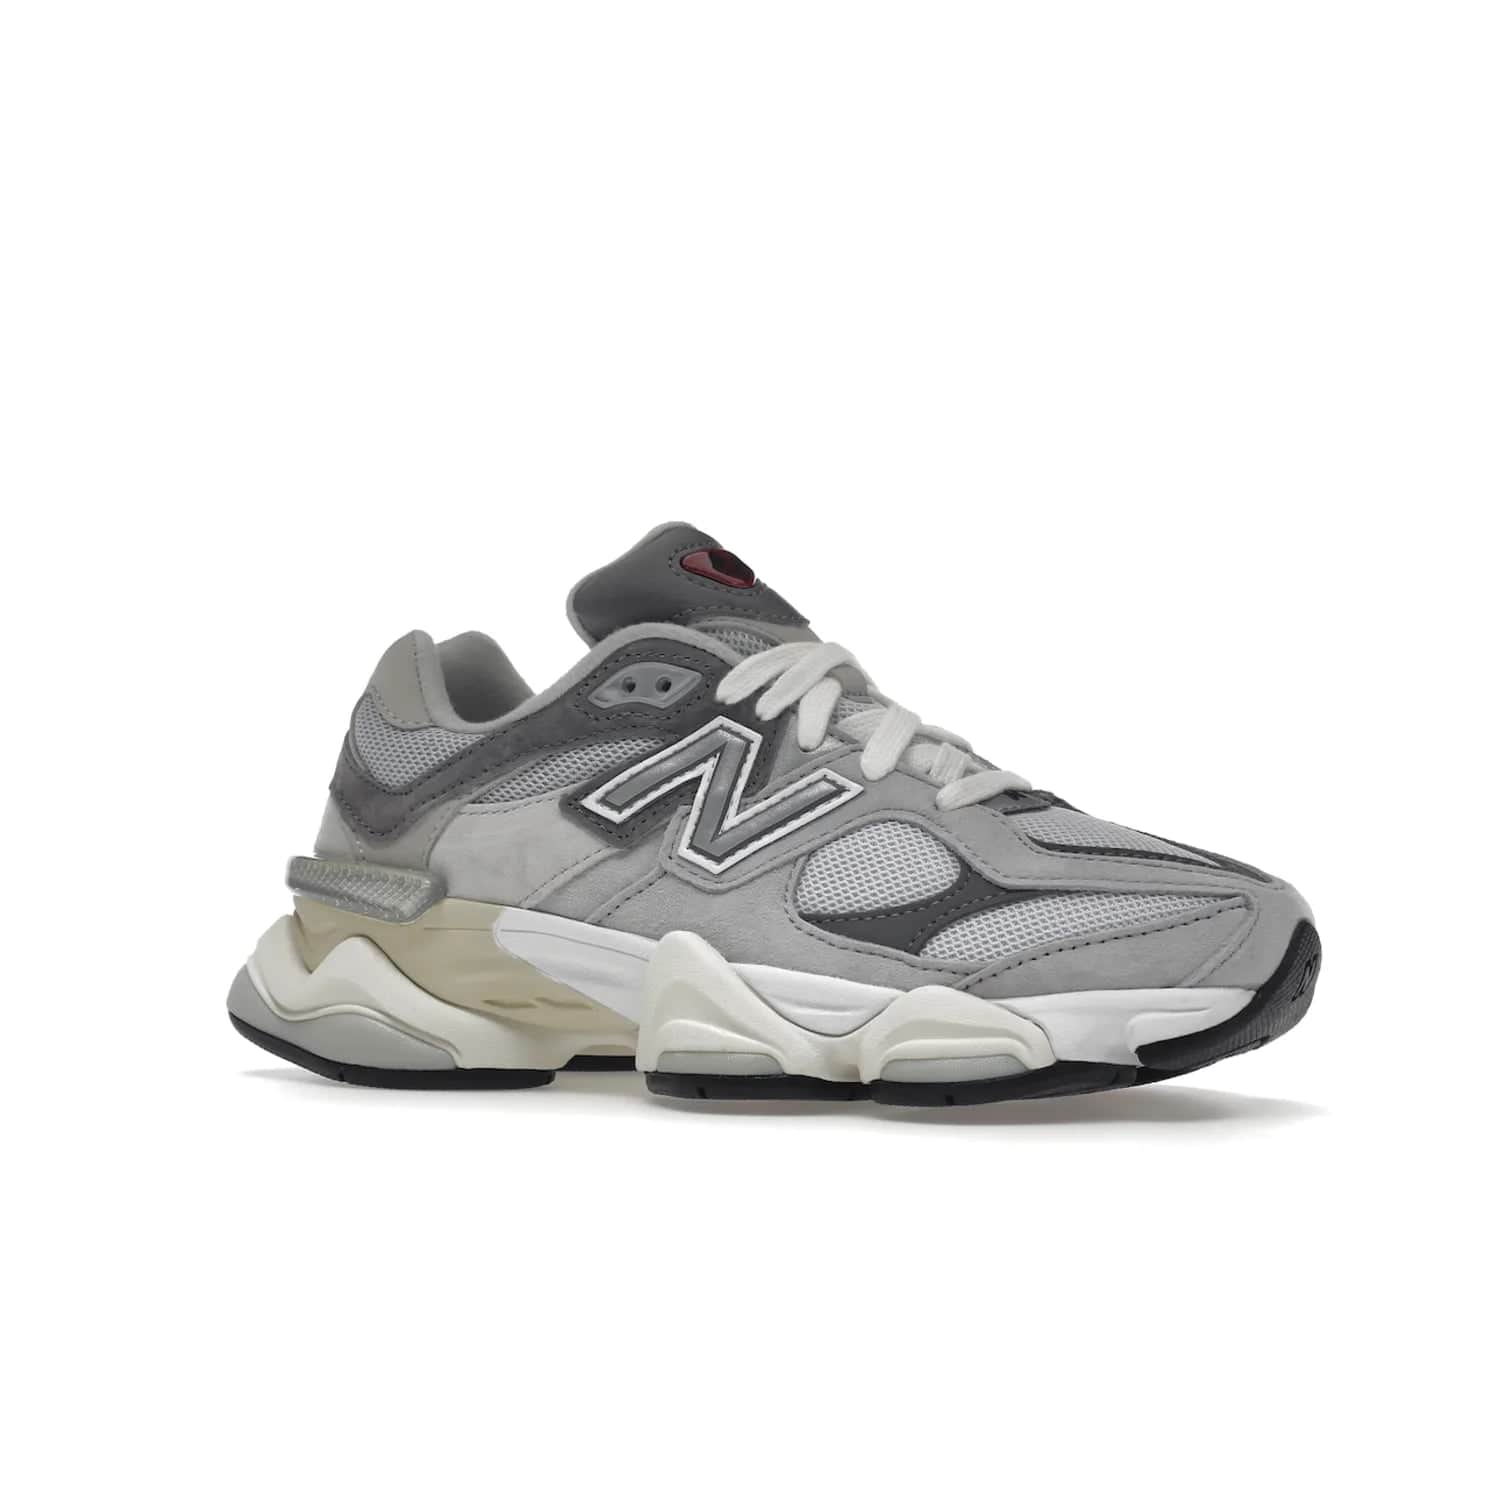 New Balance 9060 Rain Cloud Grey - Image 4 - Only at www.BallersClubKickz.com - New Balance 9060 Rain Cloud Grey is an early 2000s design with grey and off-white tones. Pigskin suede, mesh, and silver accents. "N" emblem and dual-density midsole on diamond outsole. ABZORB technology cushioning. September 2nd release for $150.